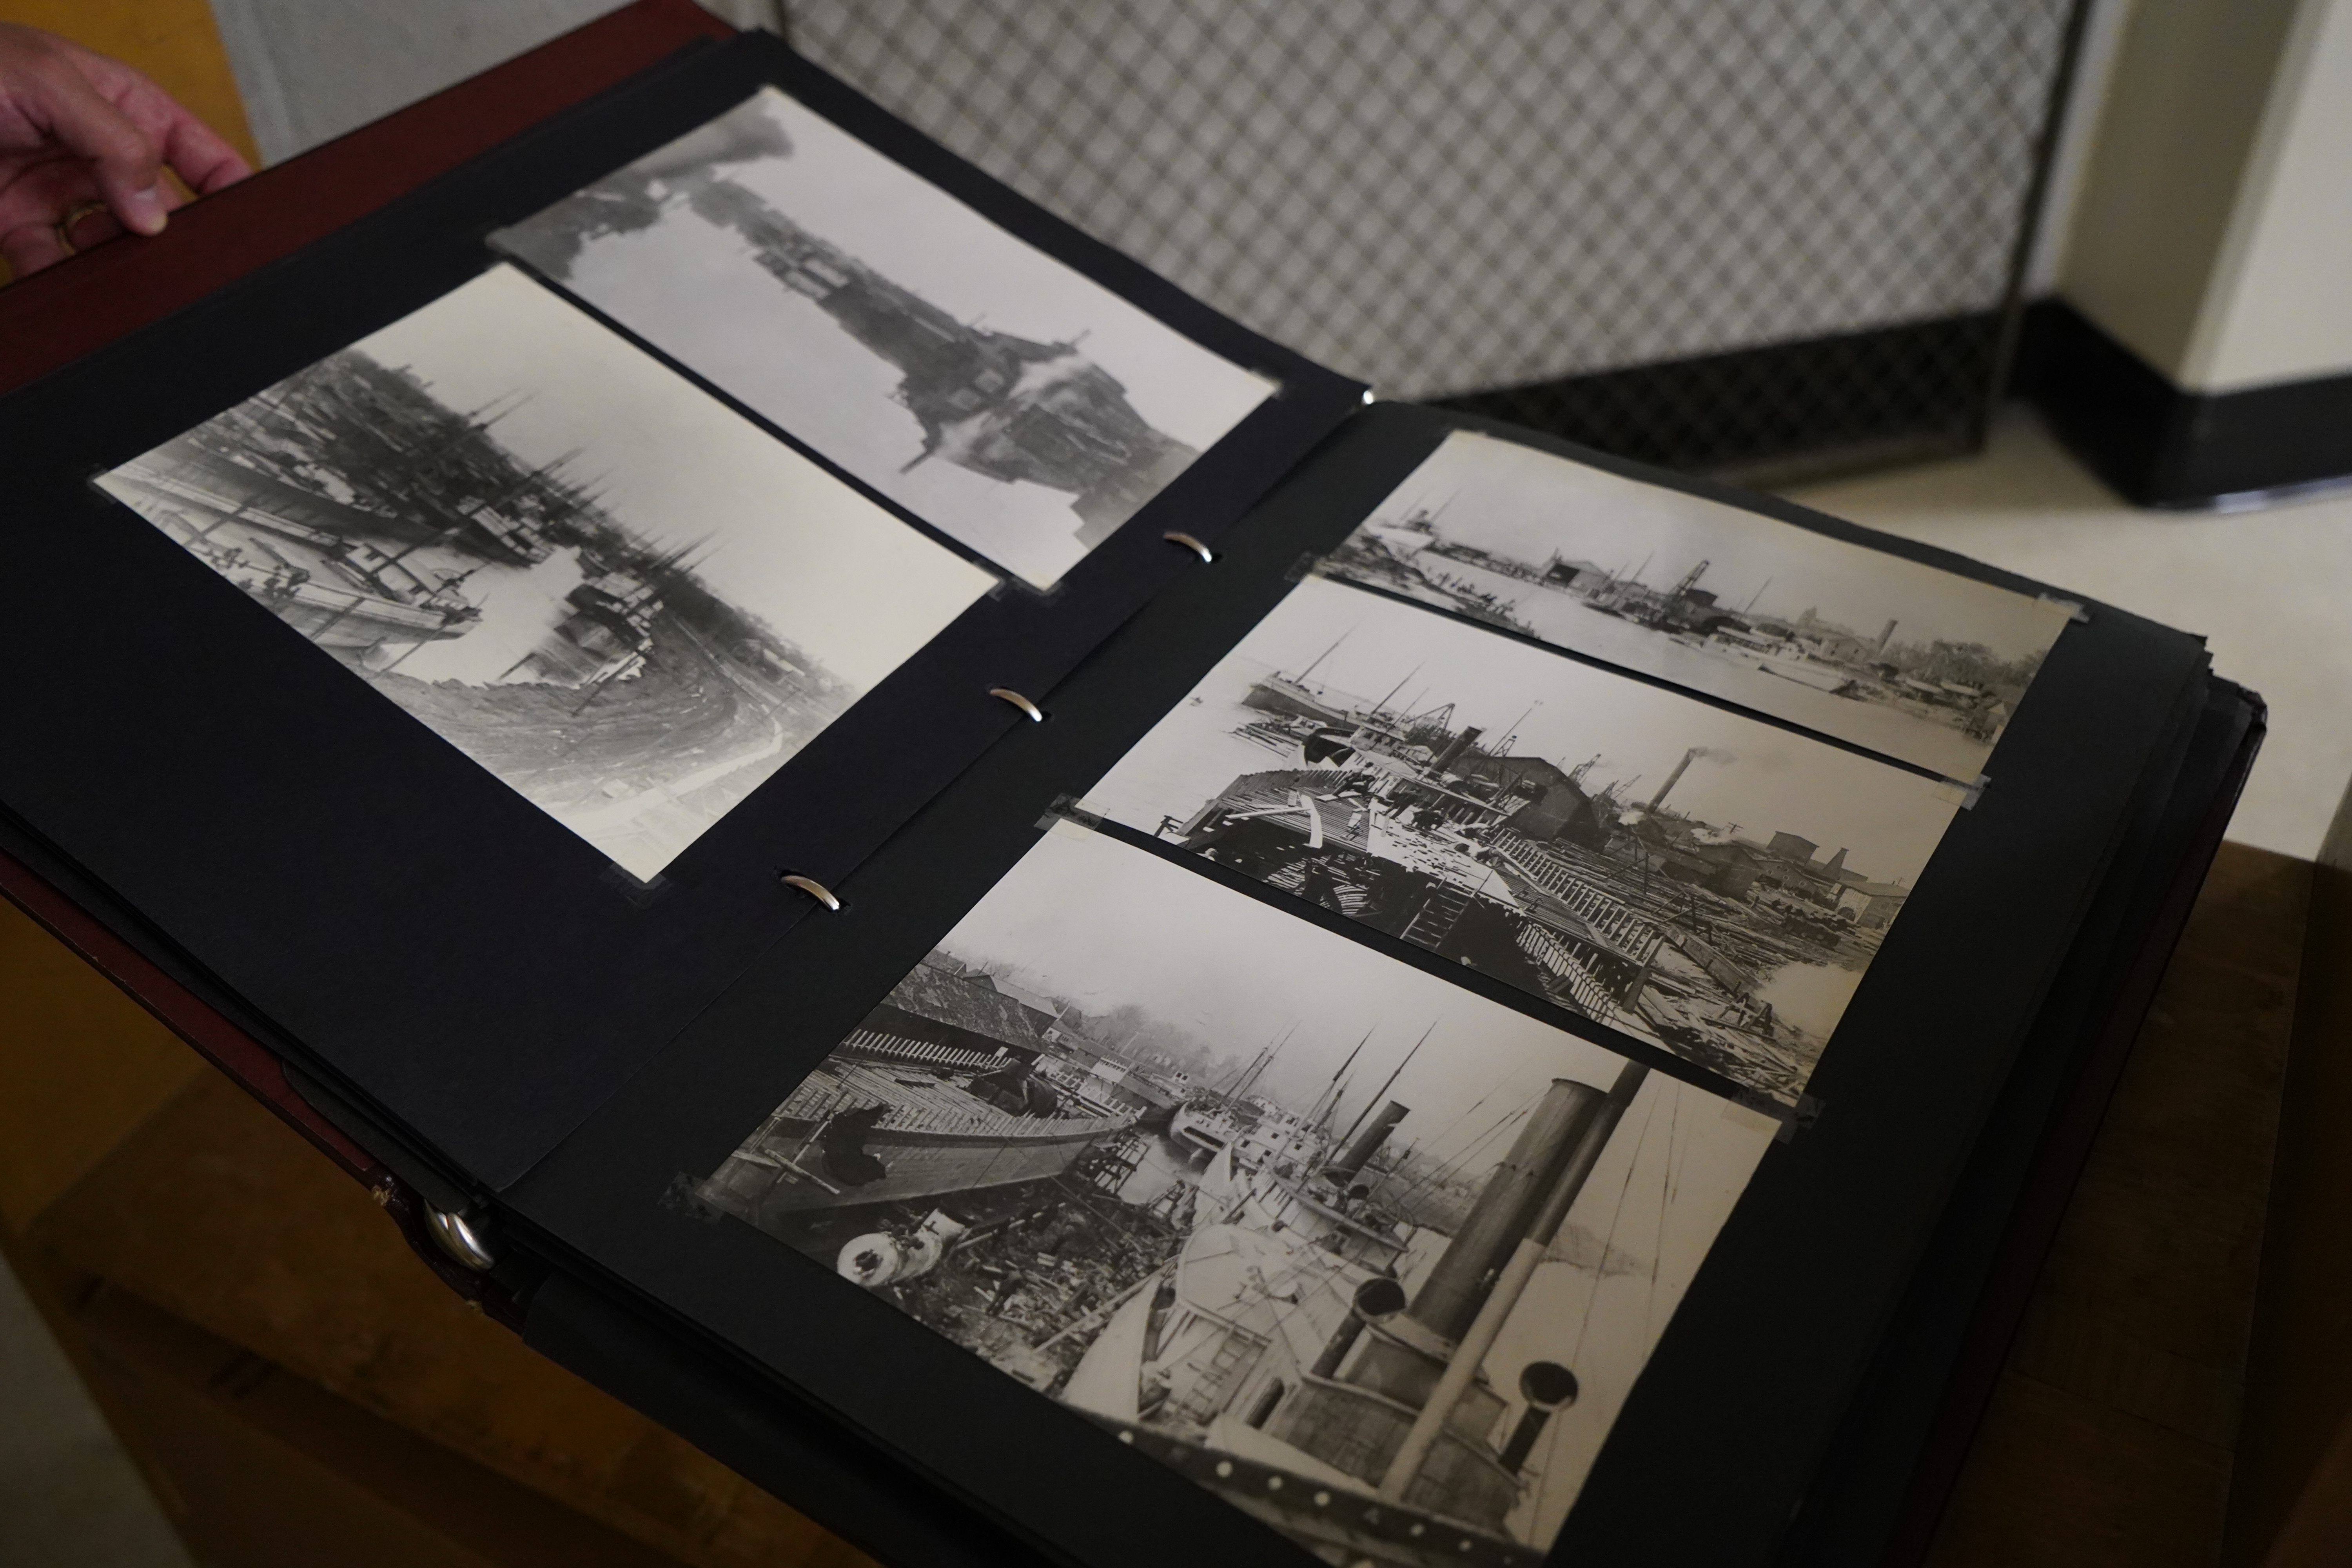 A binder showcases five black and white photos of Dowling's collection